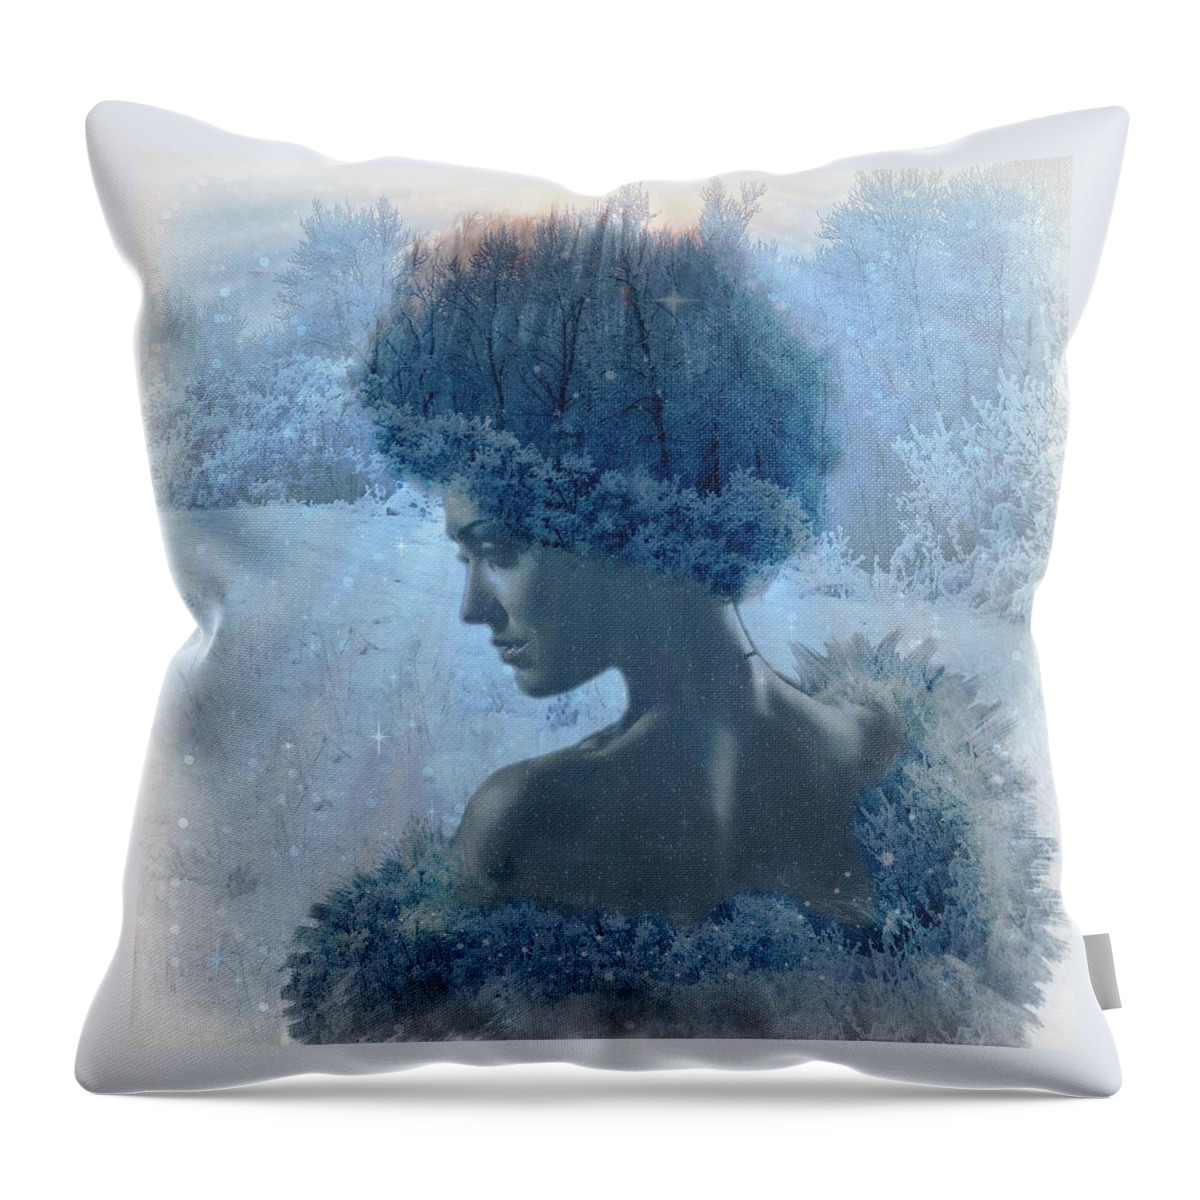 Woman Throw Pillow featuring the digital art Nymph of January by Lilia D